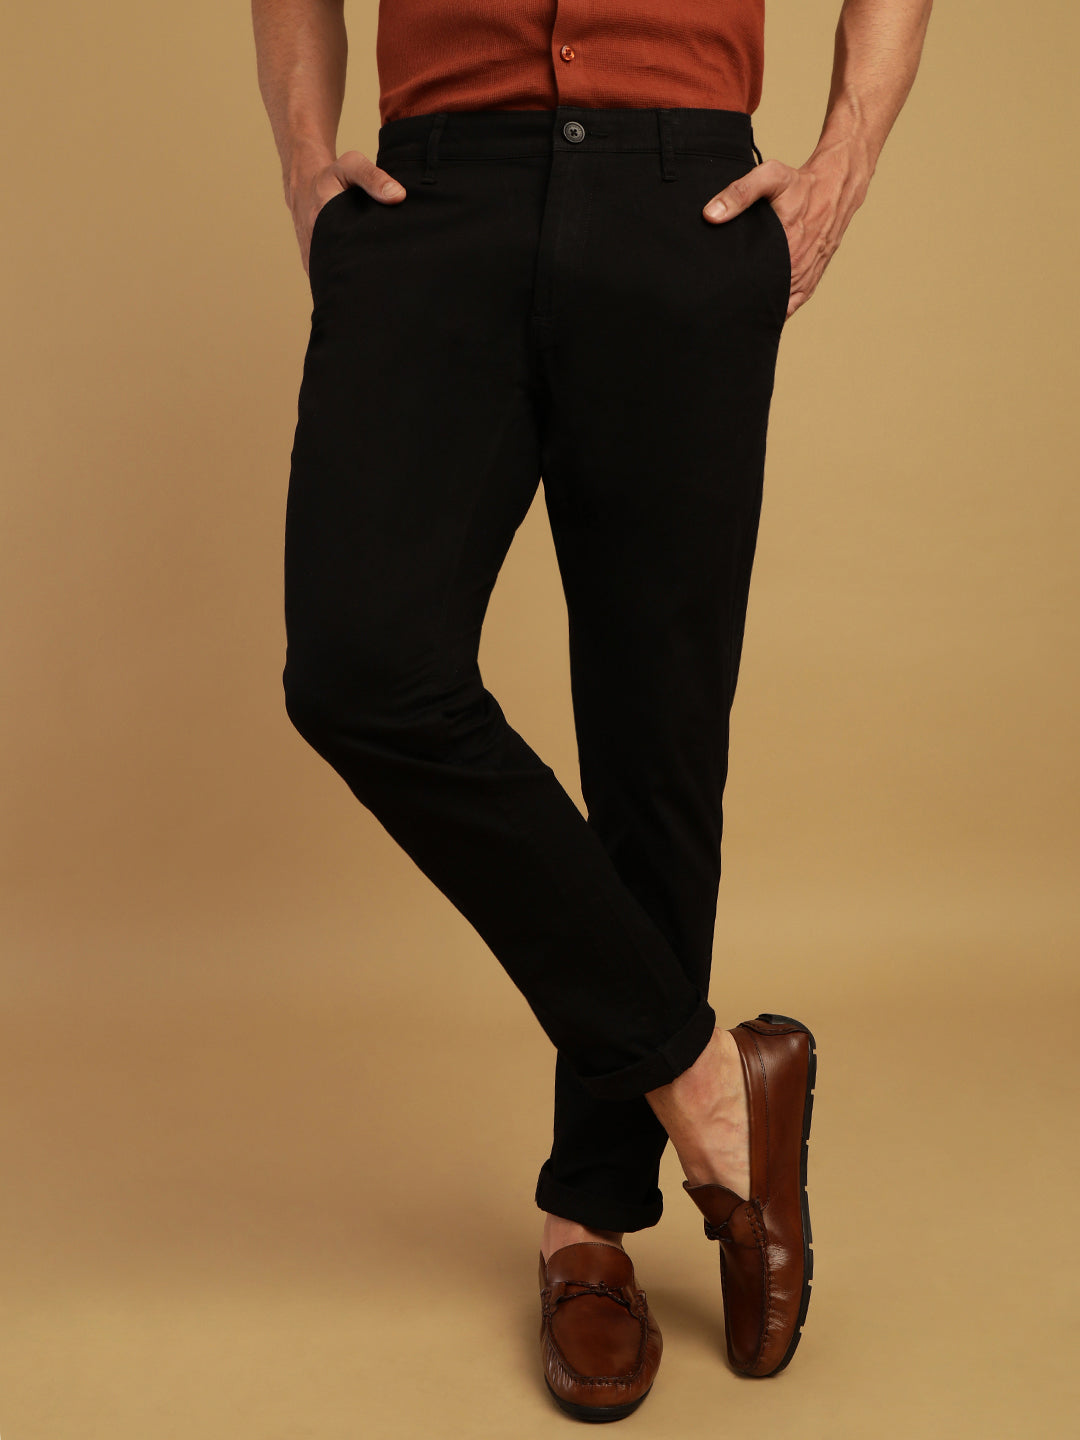 TEXTURED TROUSER IN TRIM FIT